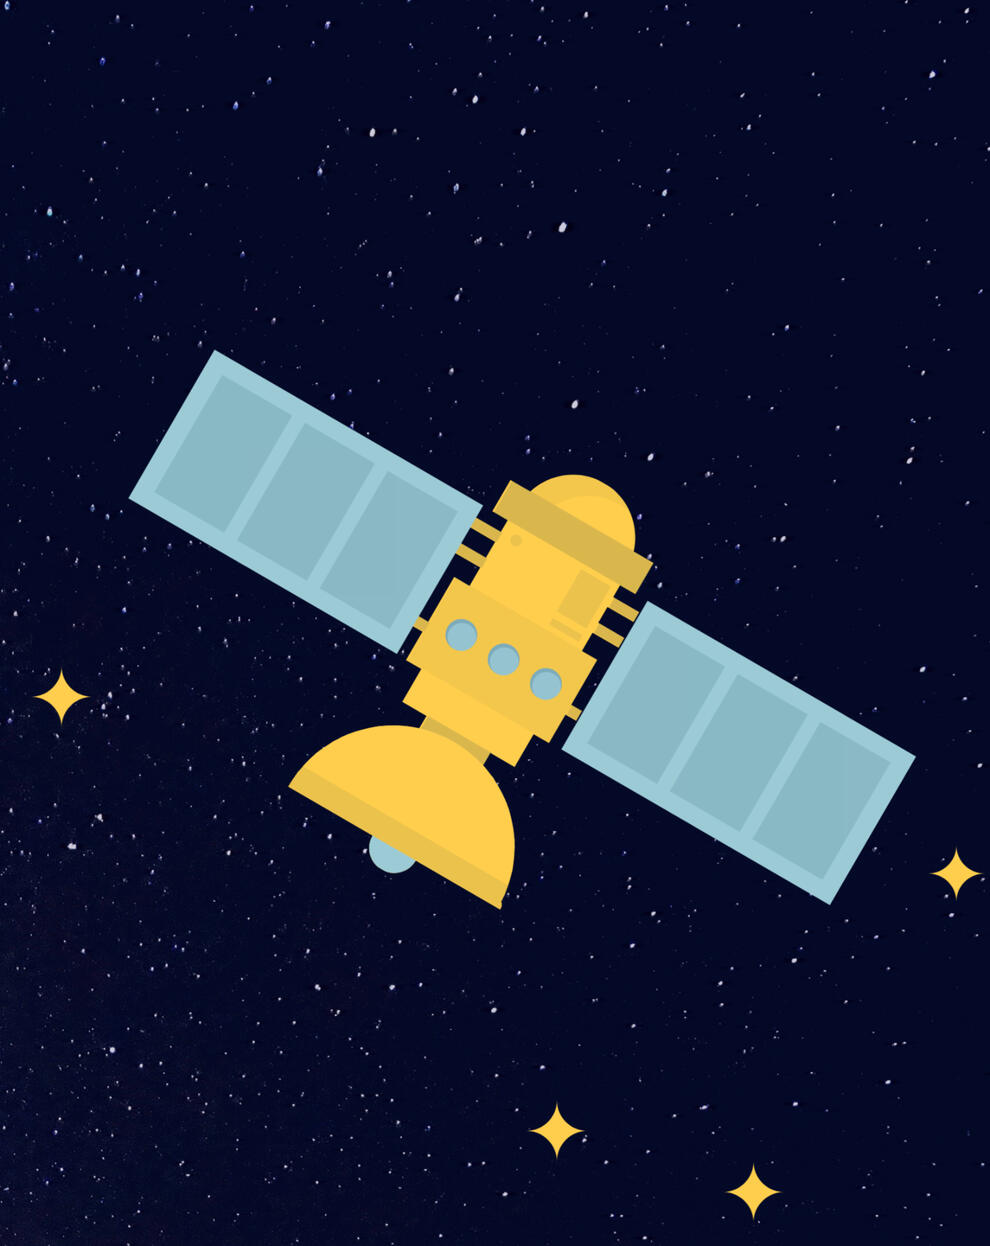 A yellow cartoon satellite floating in space.